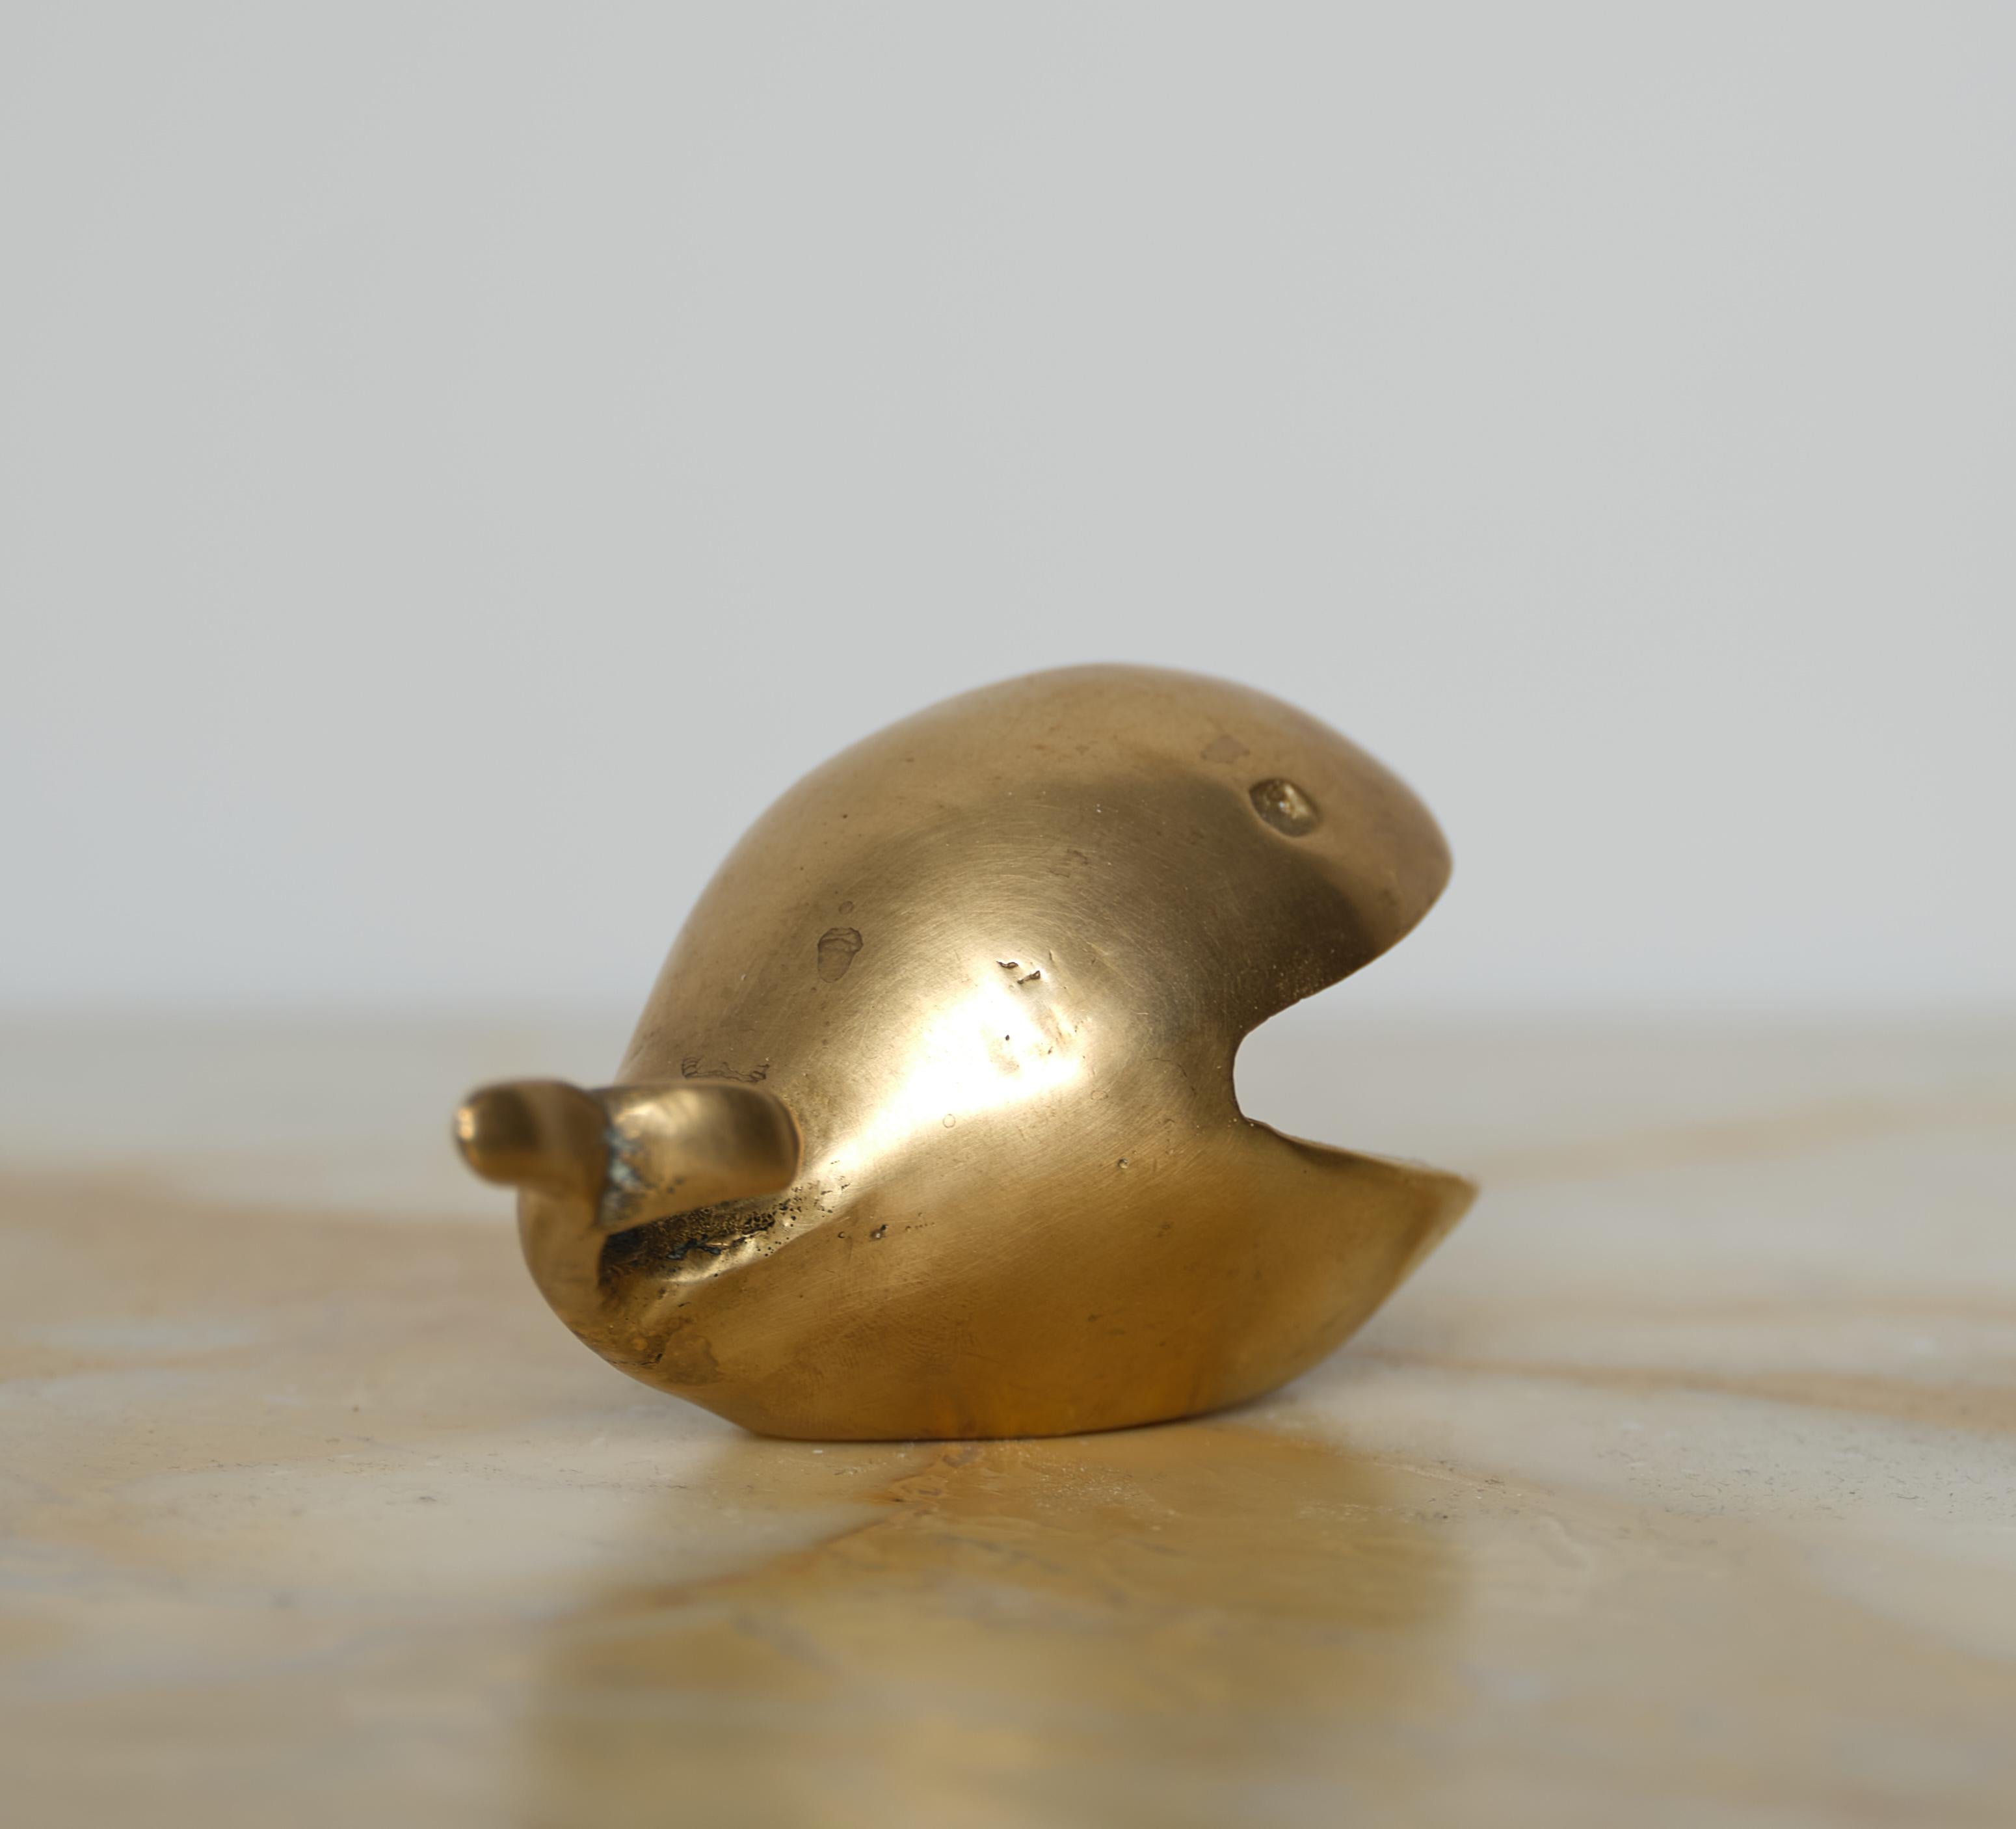 Mid-20th Century Vintage 1950s Whale-Shaped Brass Ashtray - Italian Design Elegance For Sale